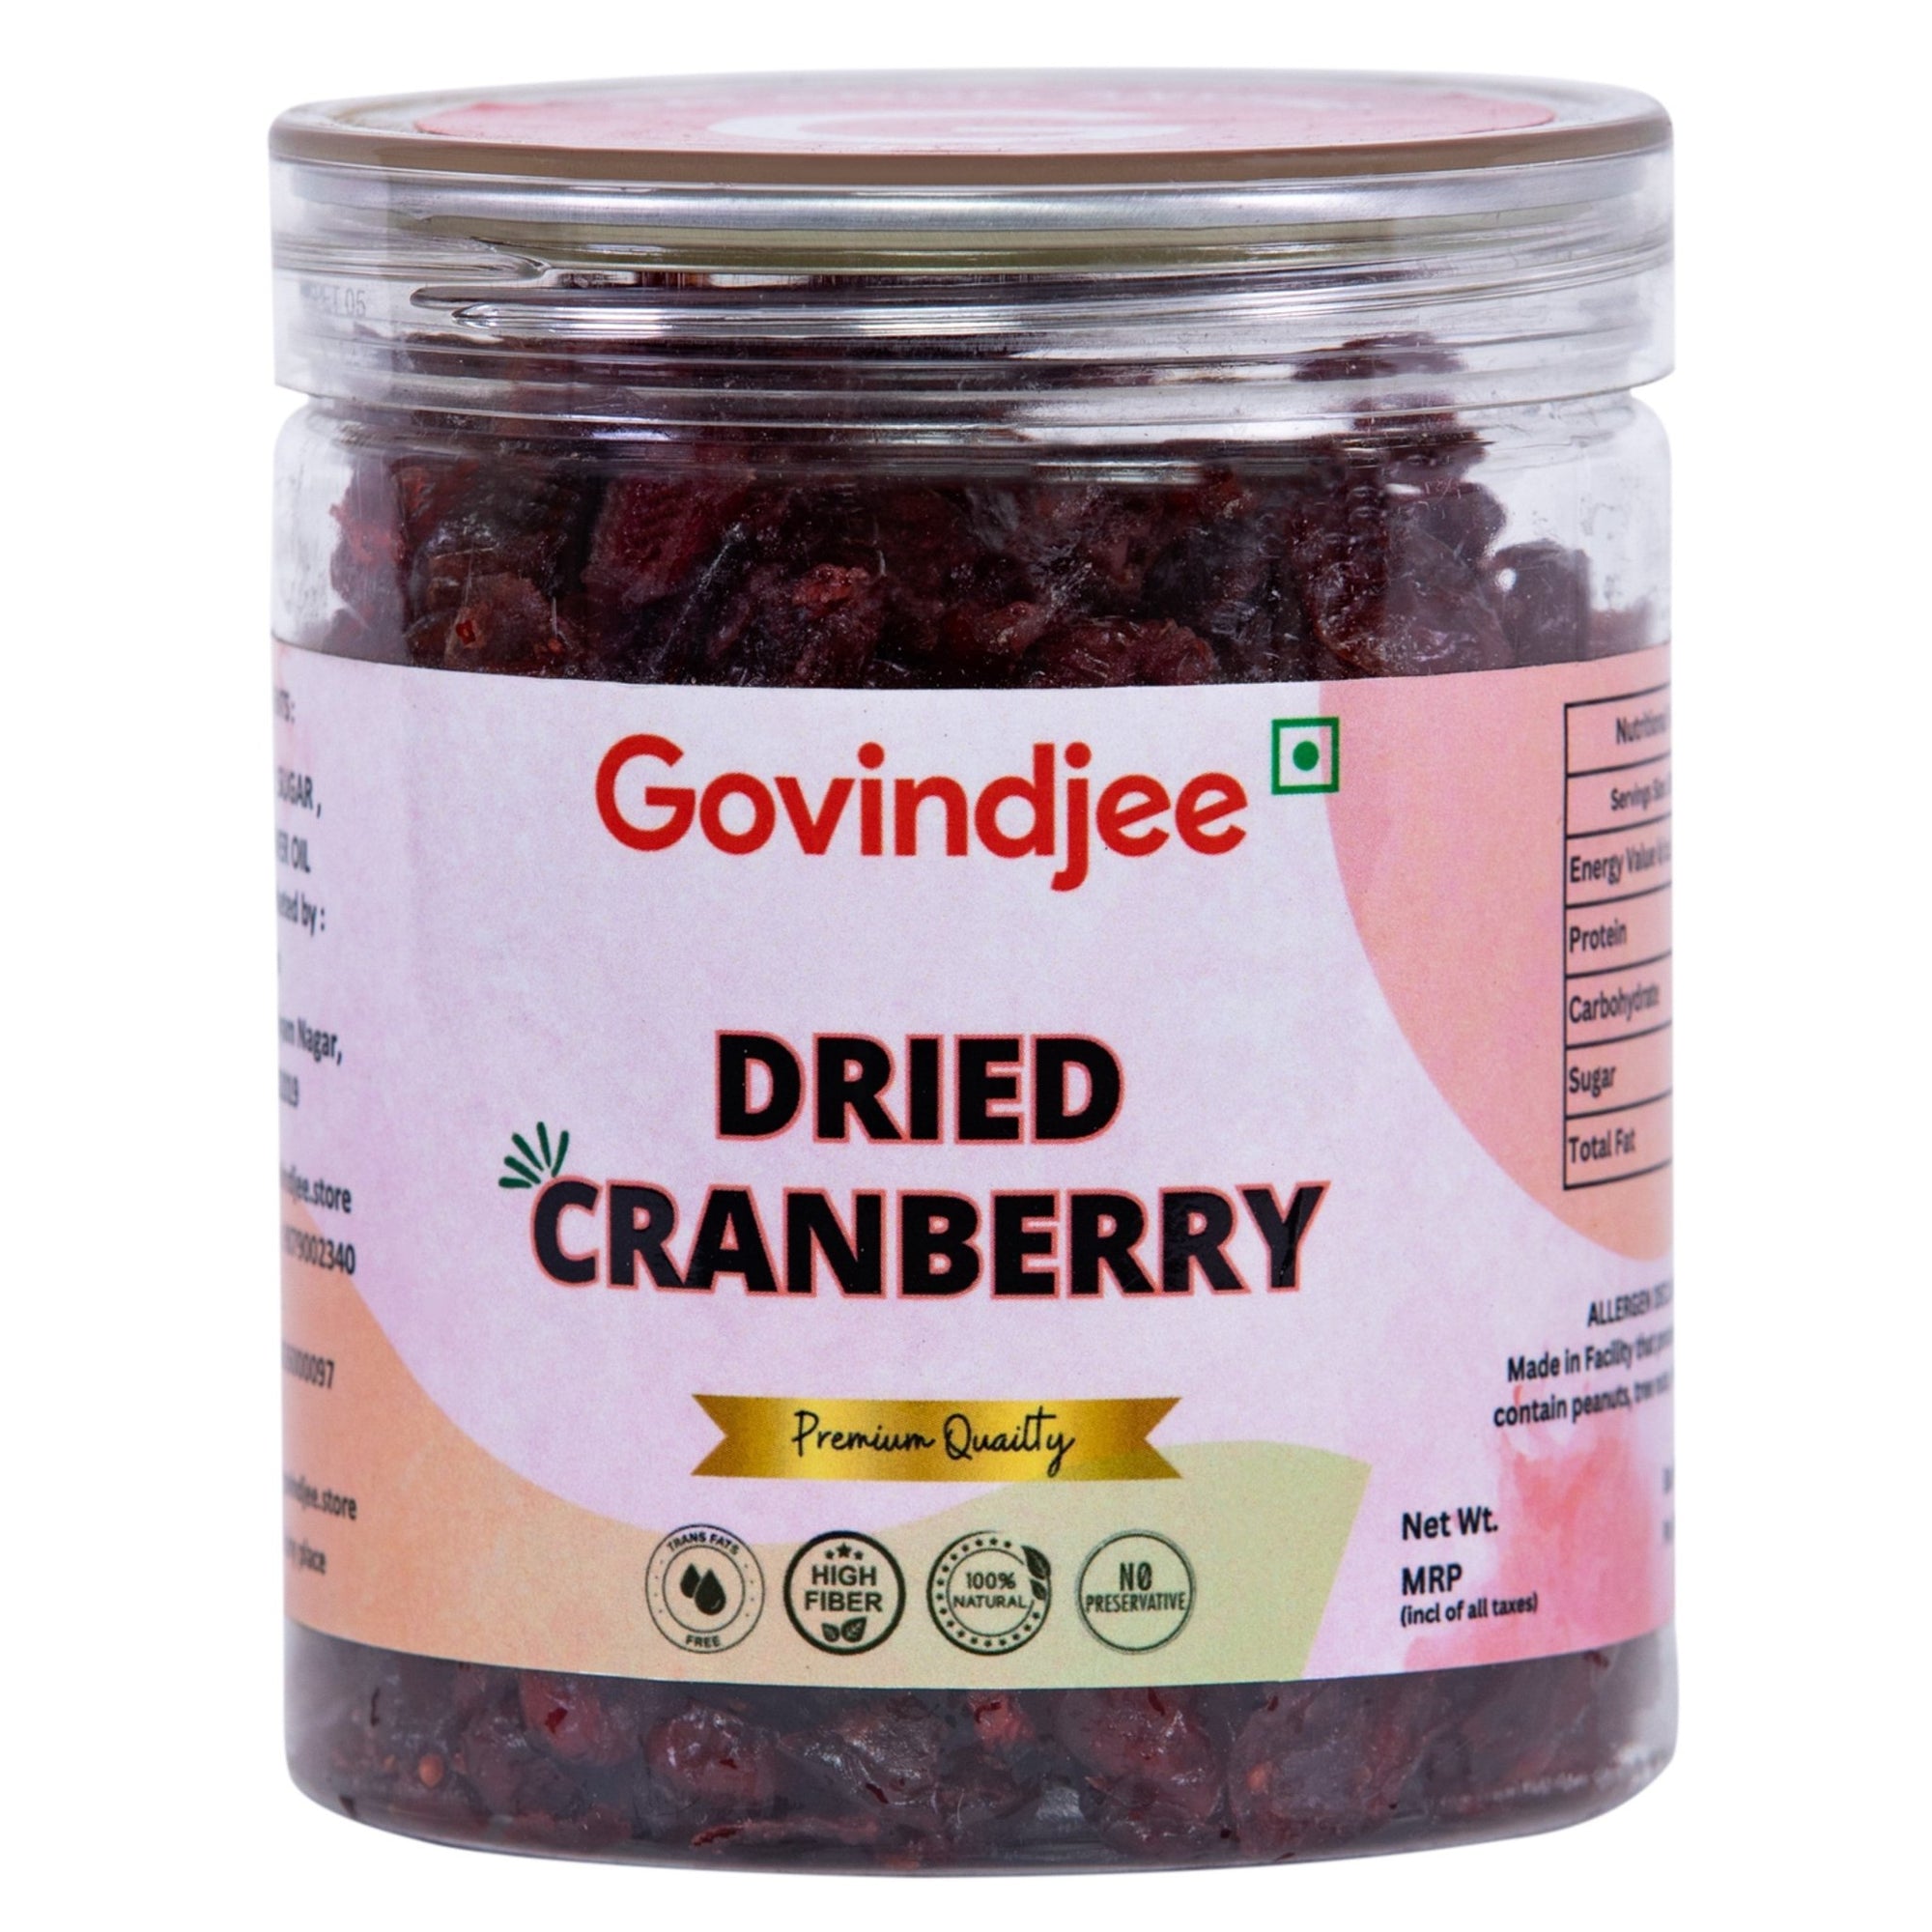 CRANBERRY DRIED1